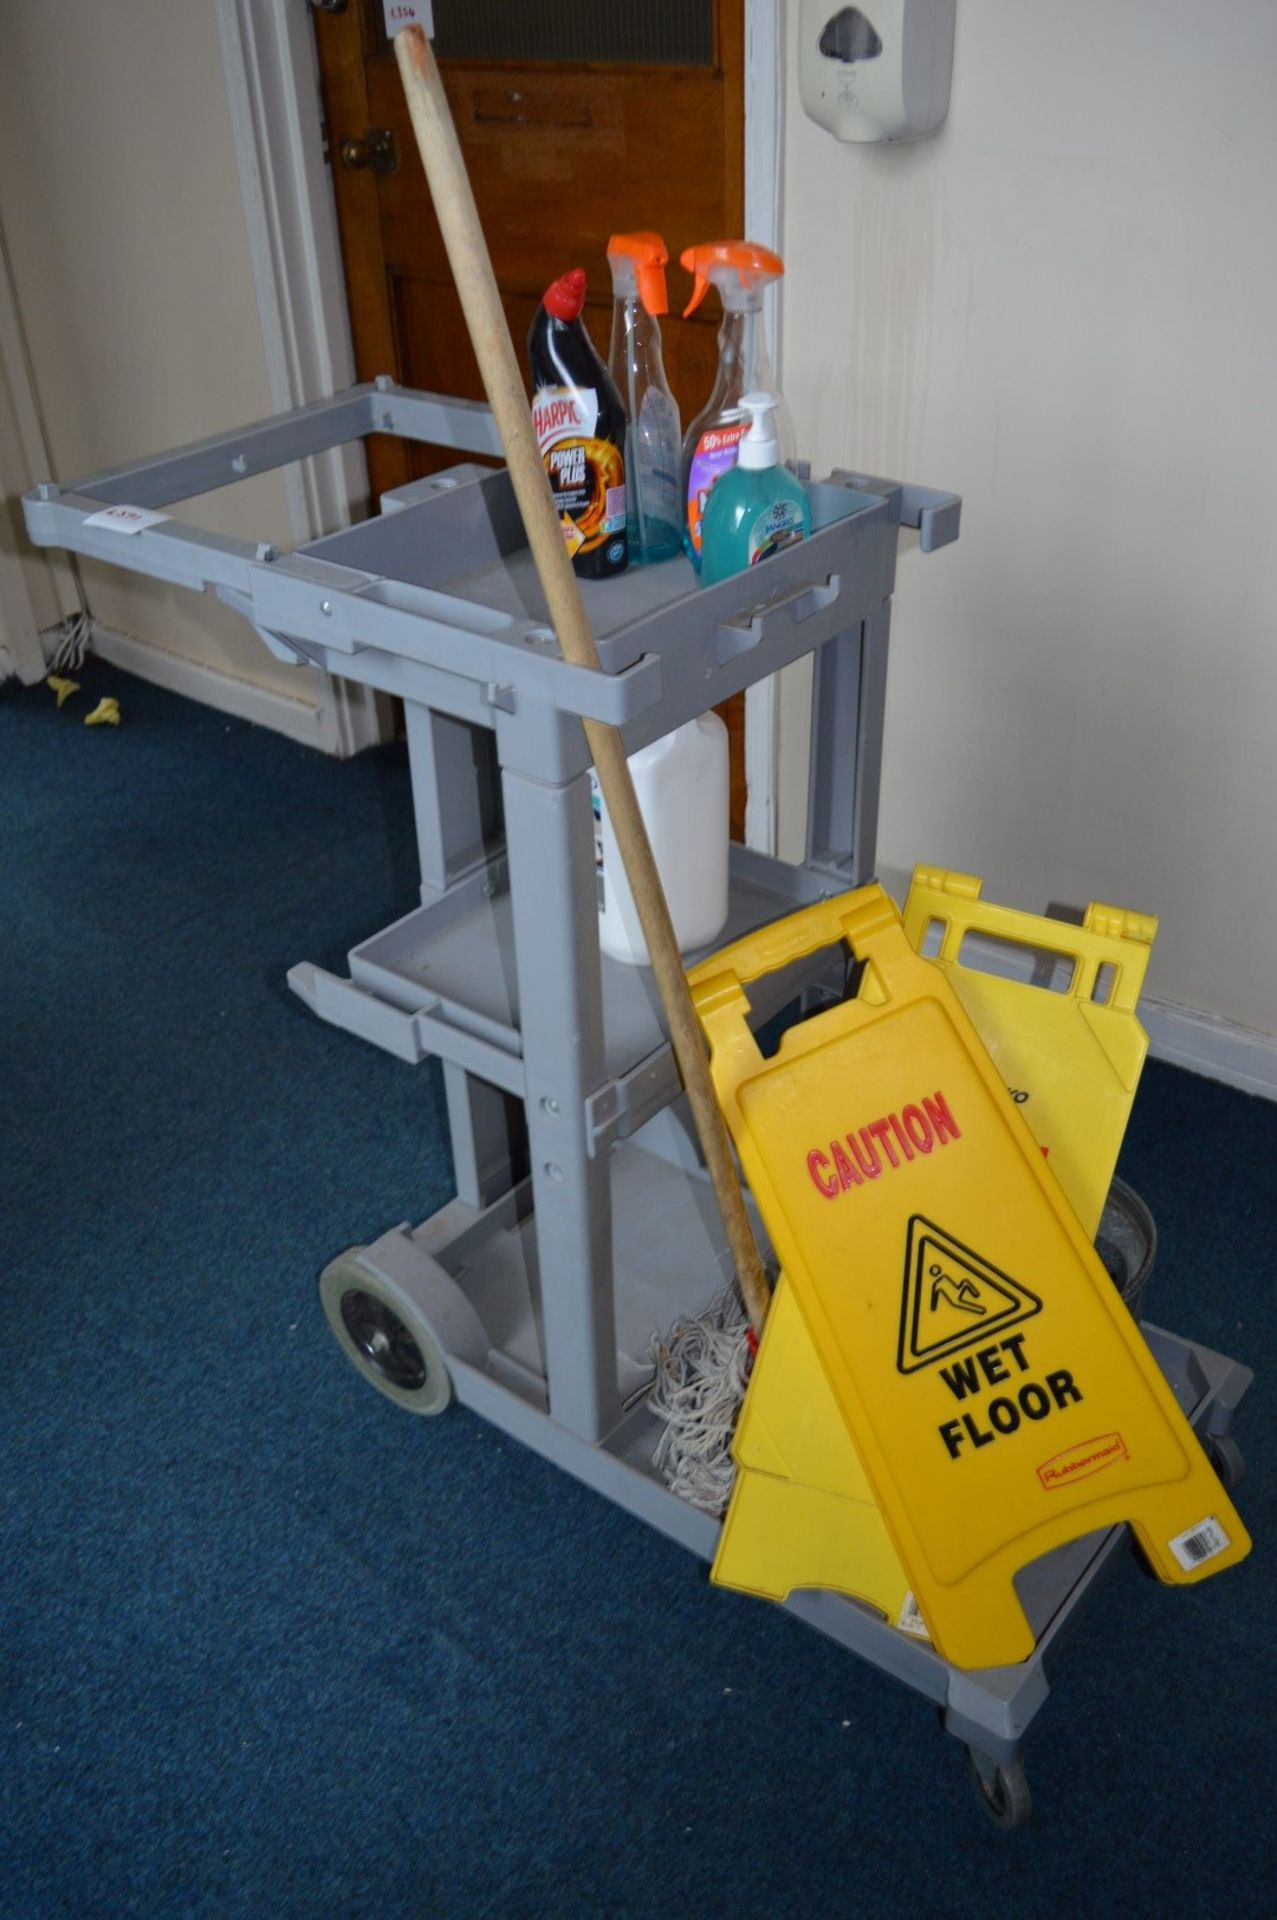 1 x Contico Struct-O-Cart Mobile Cleaning Trolley in Grey Includes Two Wet Floor Signs and Other - Image 4 of 7